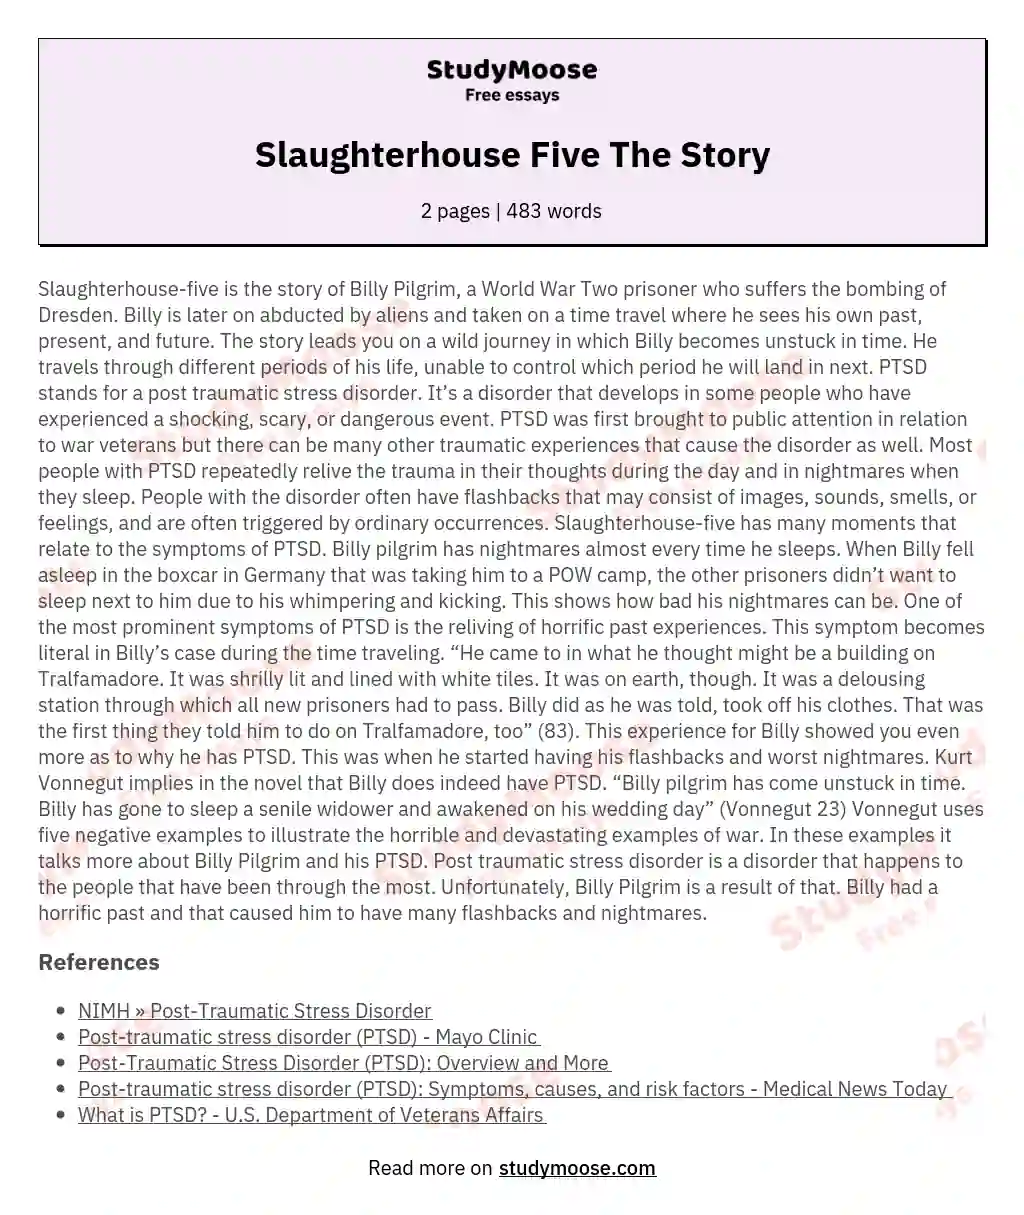 Slaughterhouse Five The Story